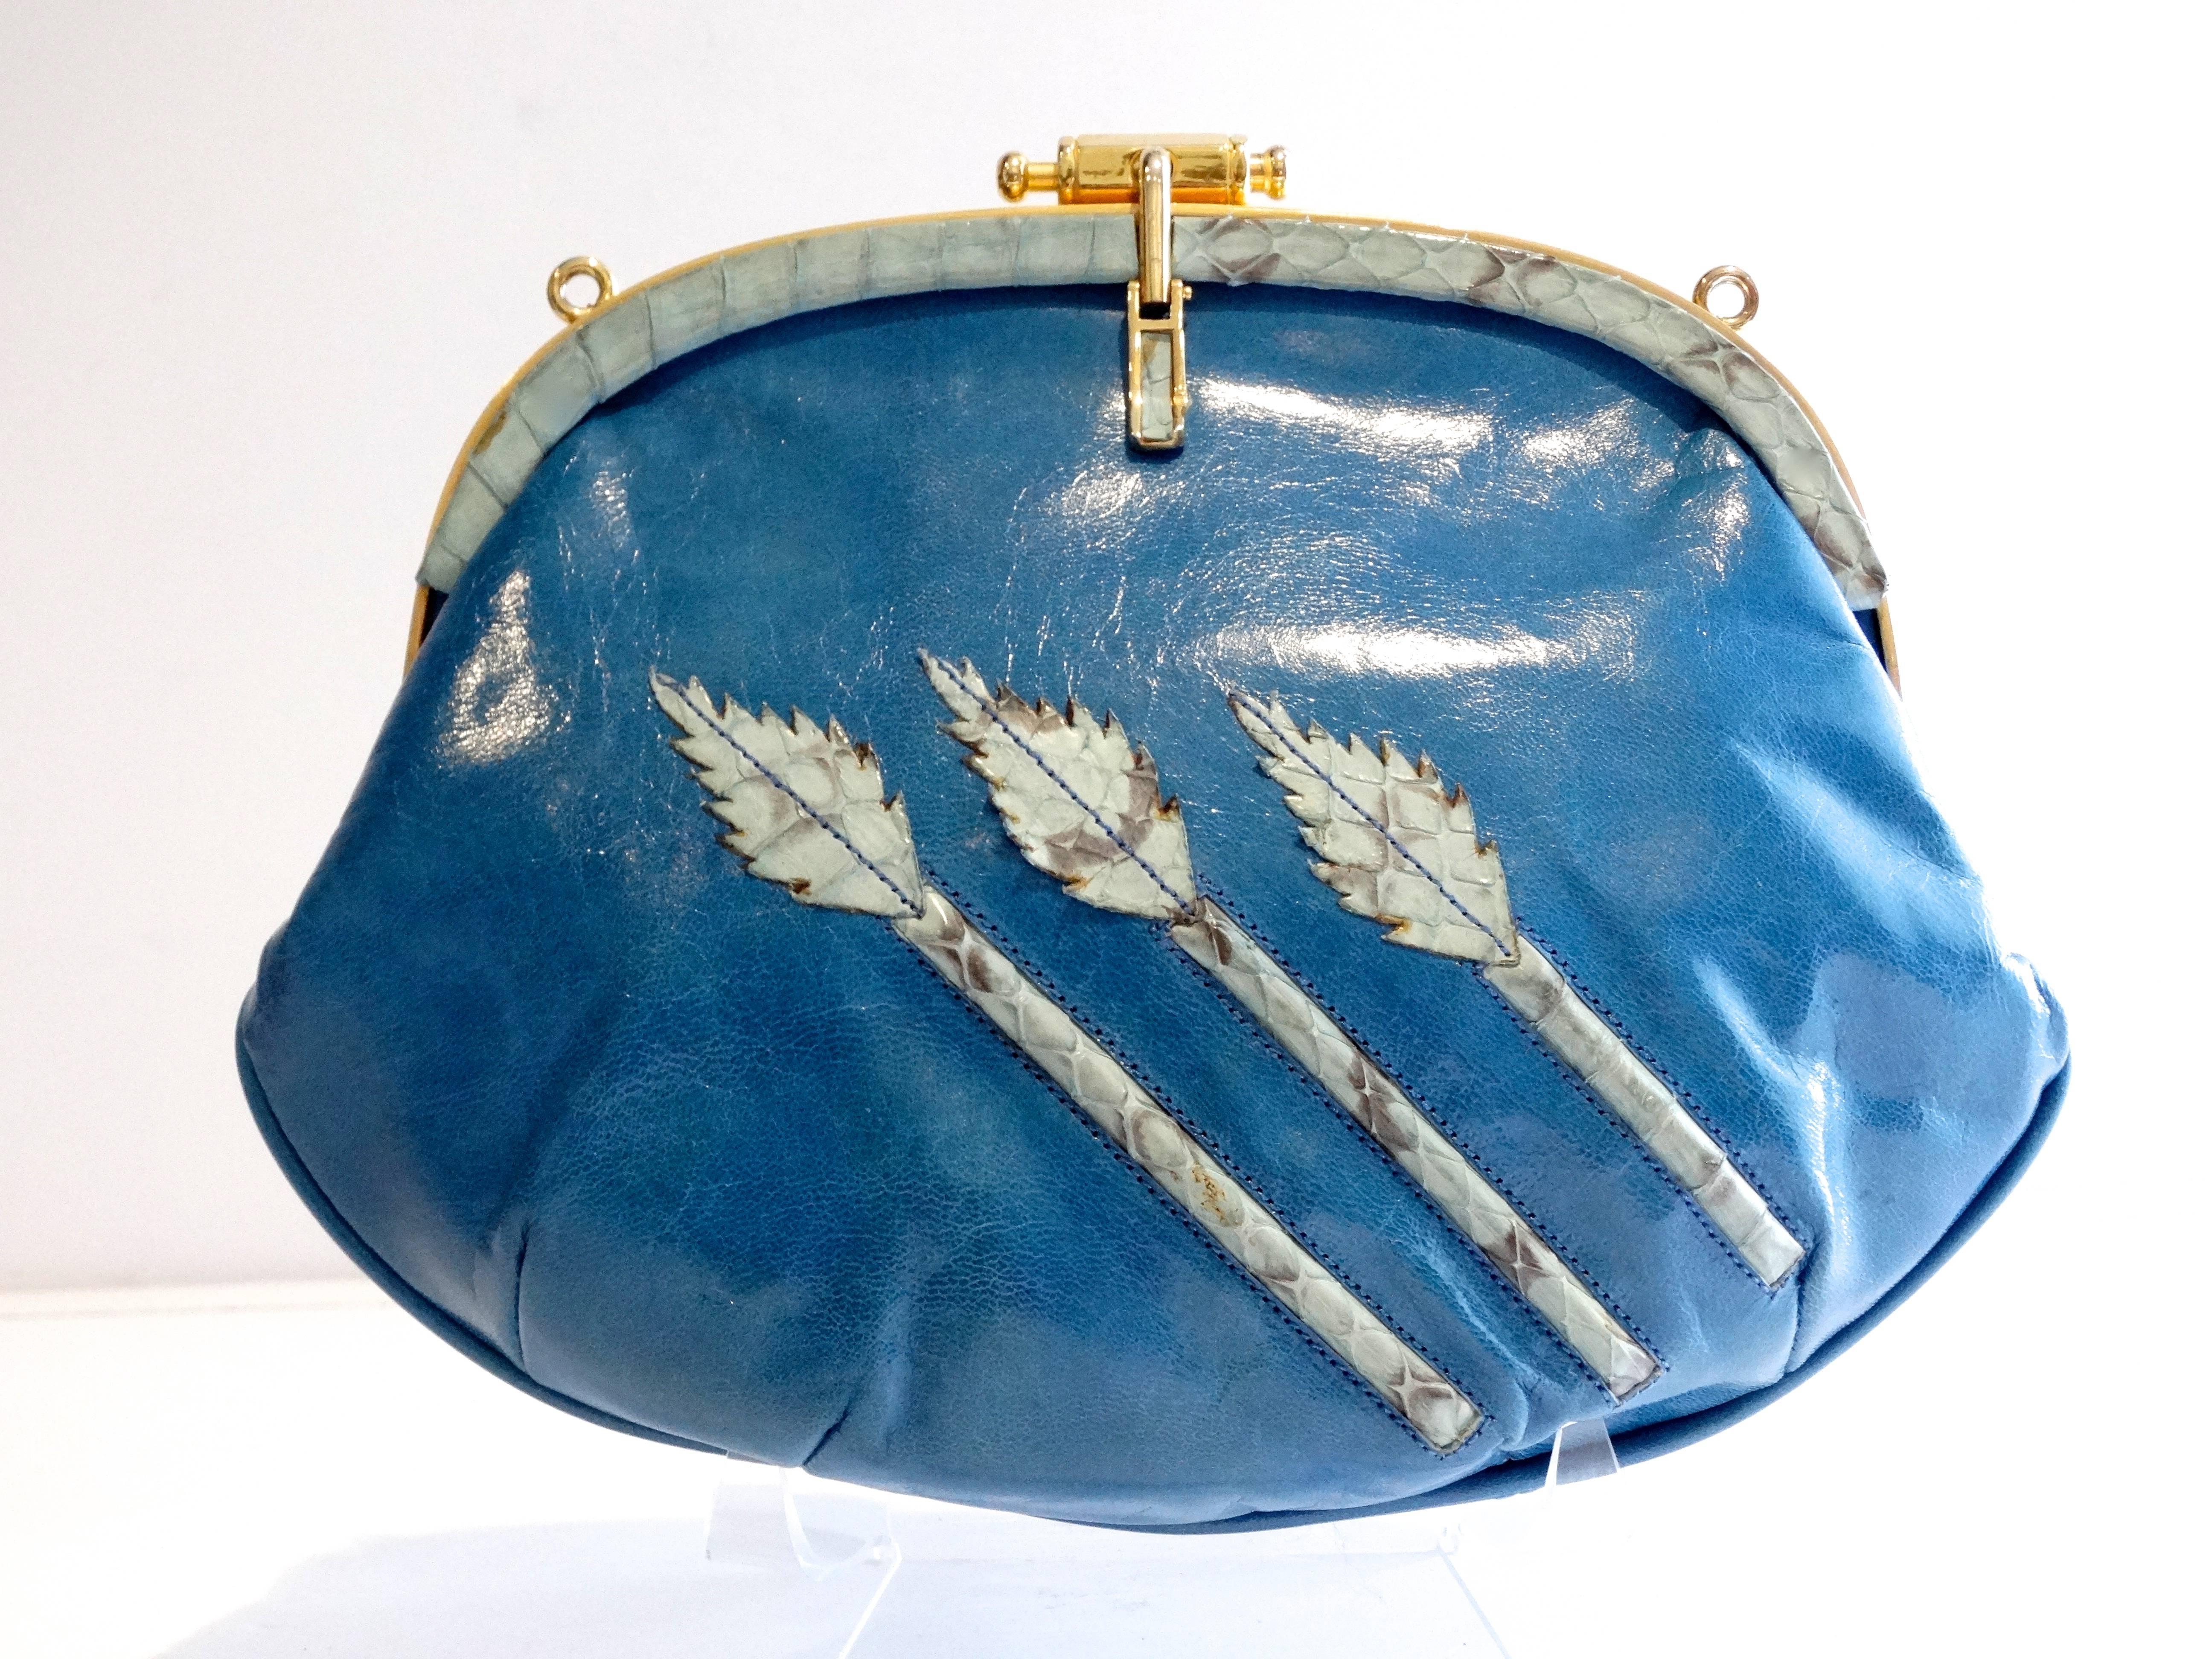 Beautiful 1970's  Nurhan shoulder bag crafted of richly smooth calfskin leather in Blue.The bag features a 3 beautiful Leaf design in blue python. A reinforced leather strap with gold hardware, which is detachable. This bag has a gold top closure